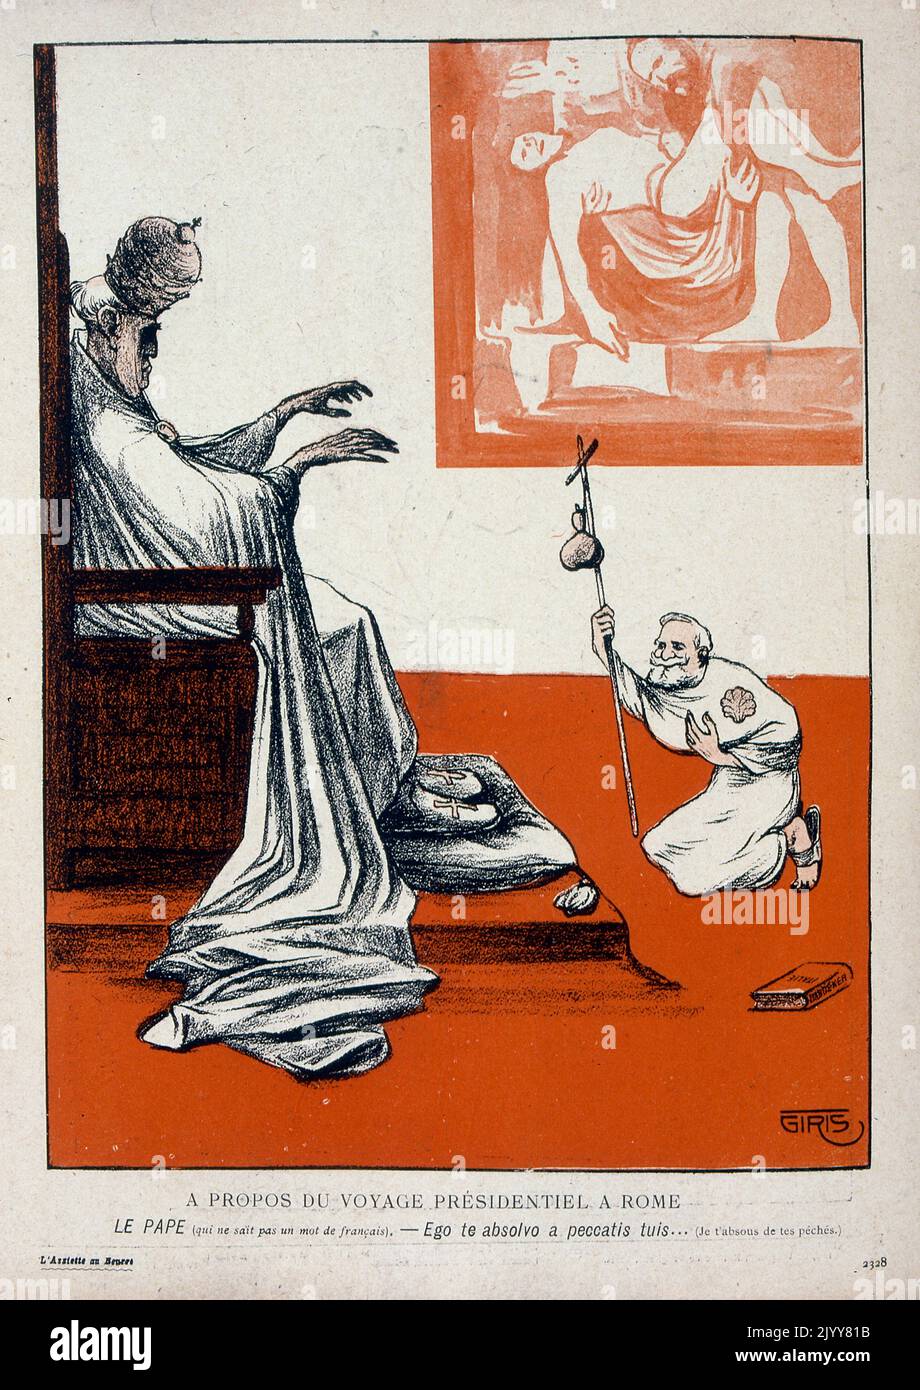 In L'Assiette au Beurre satirical magazine; Coloured Illustration About a presidential trip to Rome. The old pope is seated on his throne and declare that he absolves the sins of the bowing man before him. The caption notes that the Pope does not understand a word of French. Stock Photo